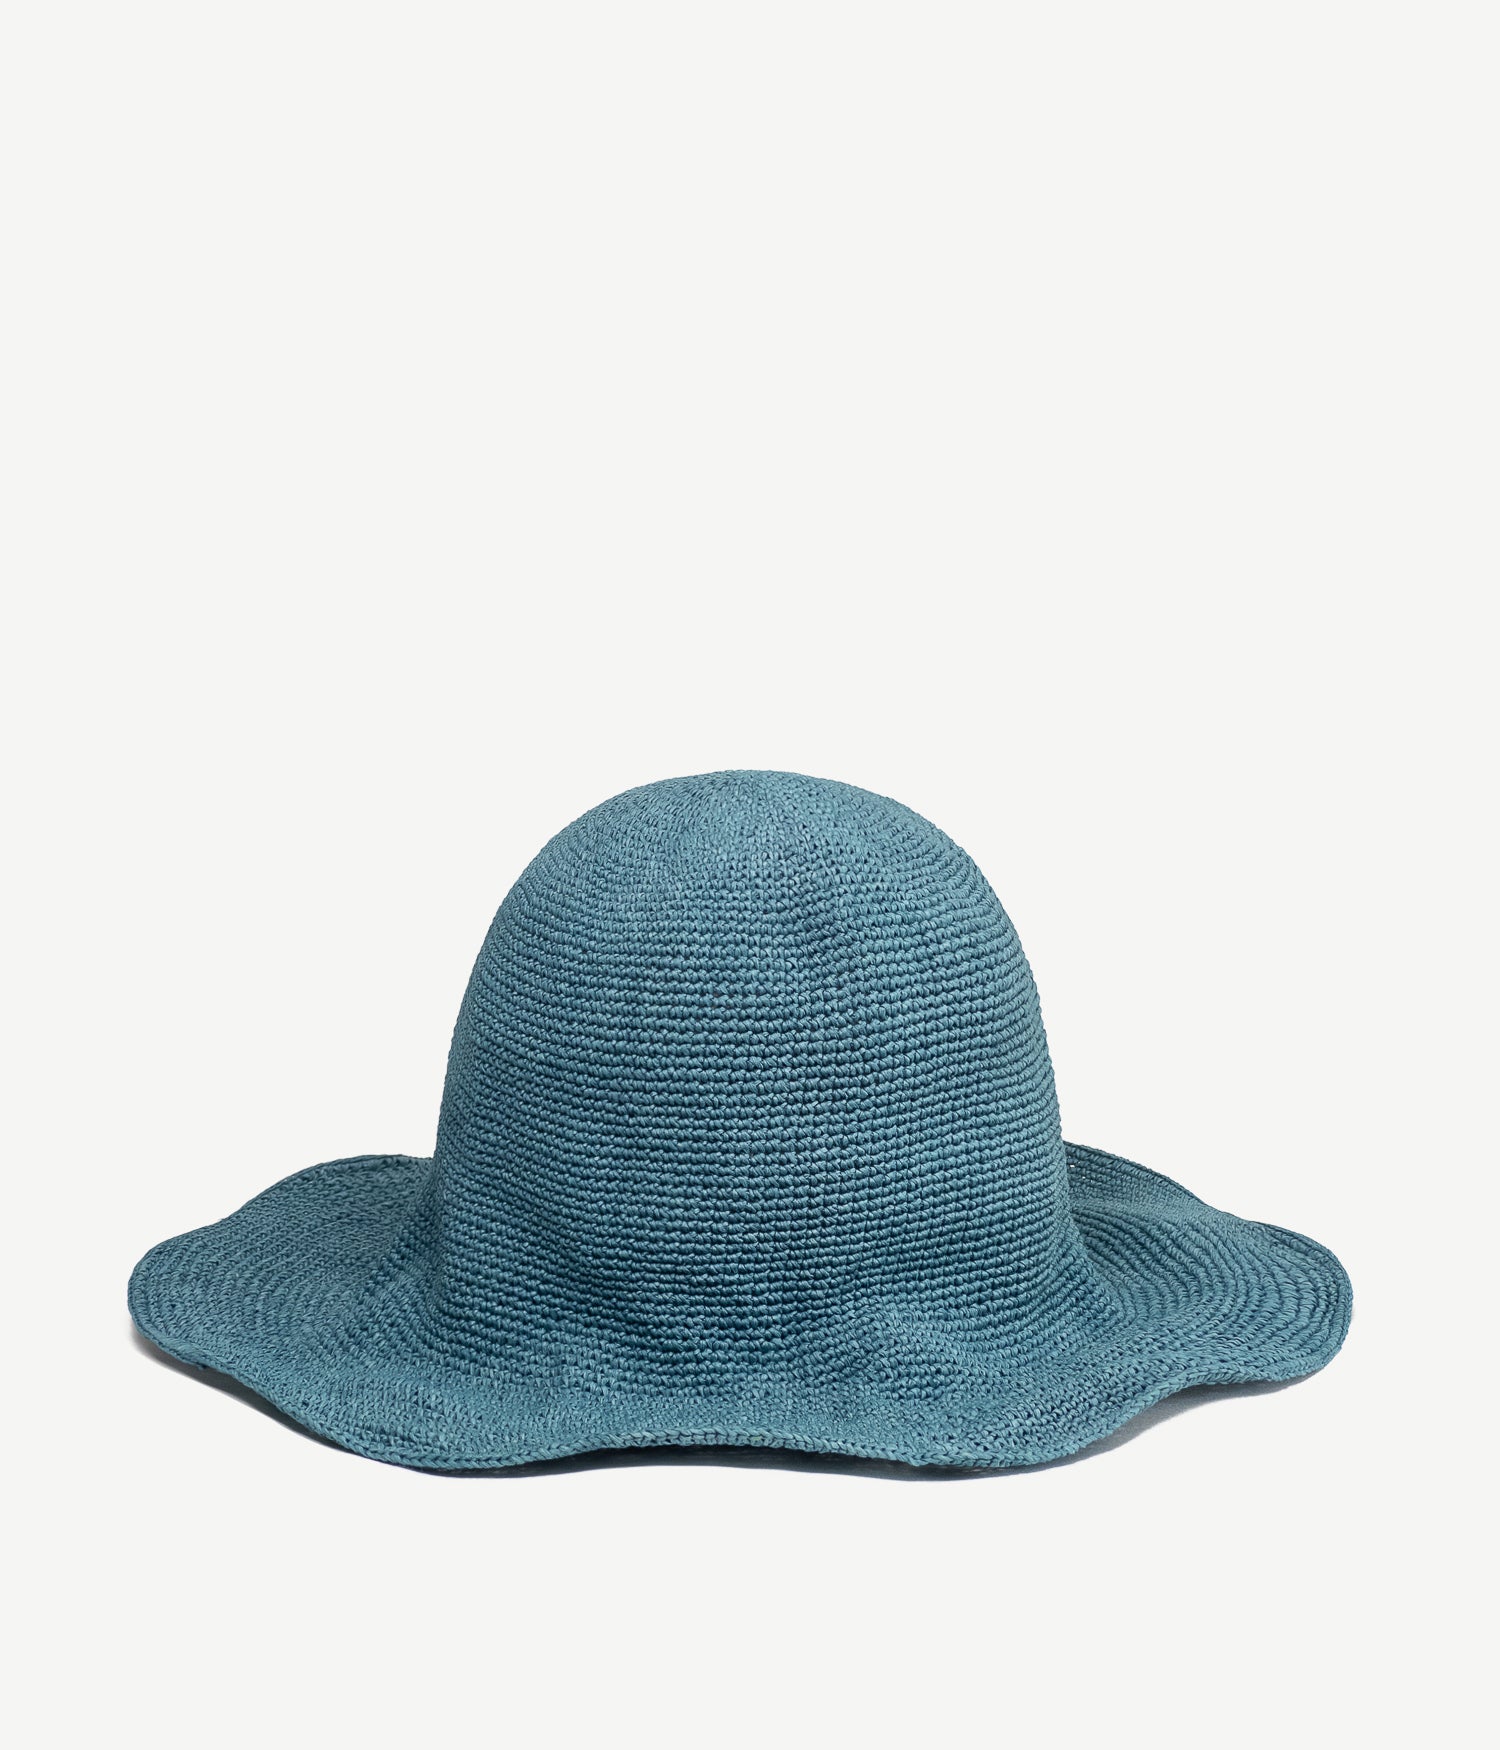 Bucket Hat Embellished with Hand-Knitted Flowers • Ruslan 